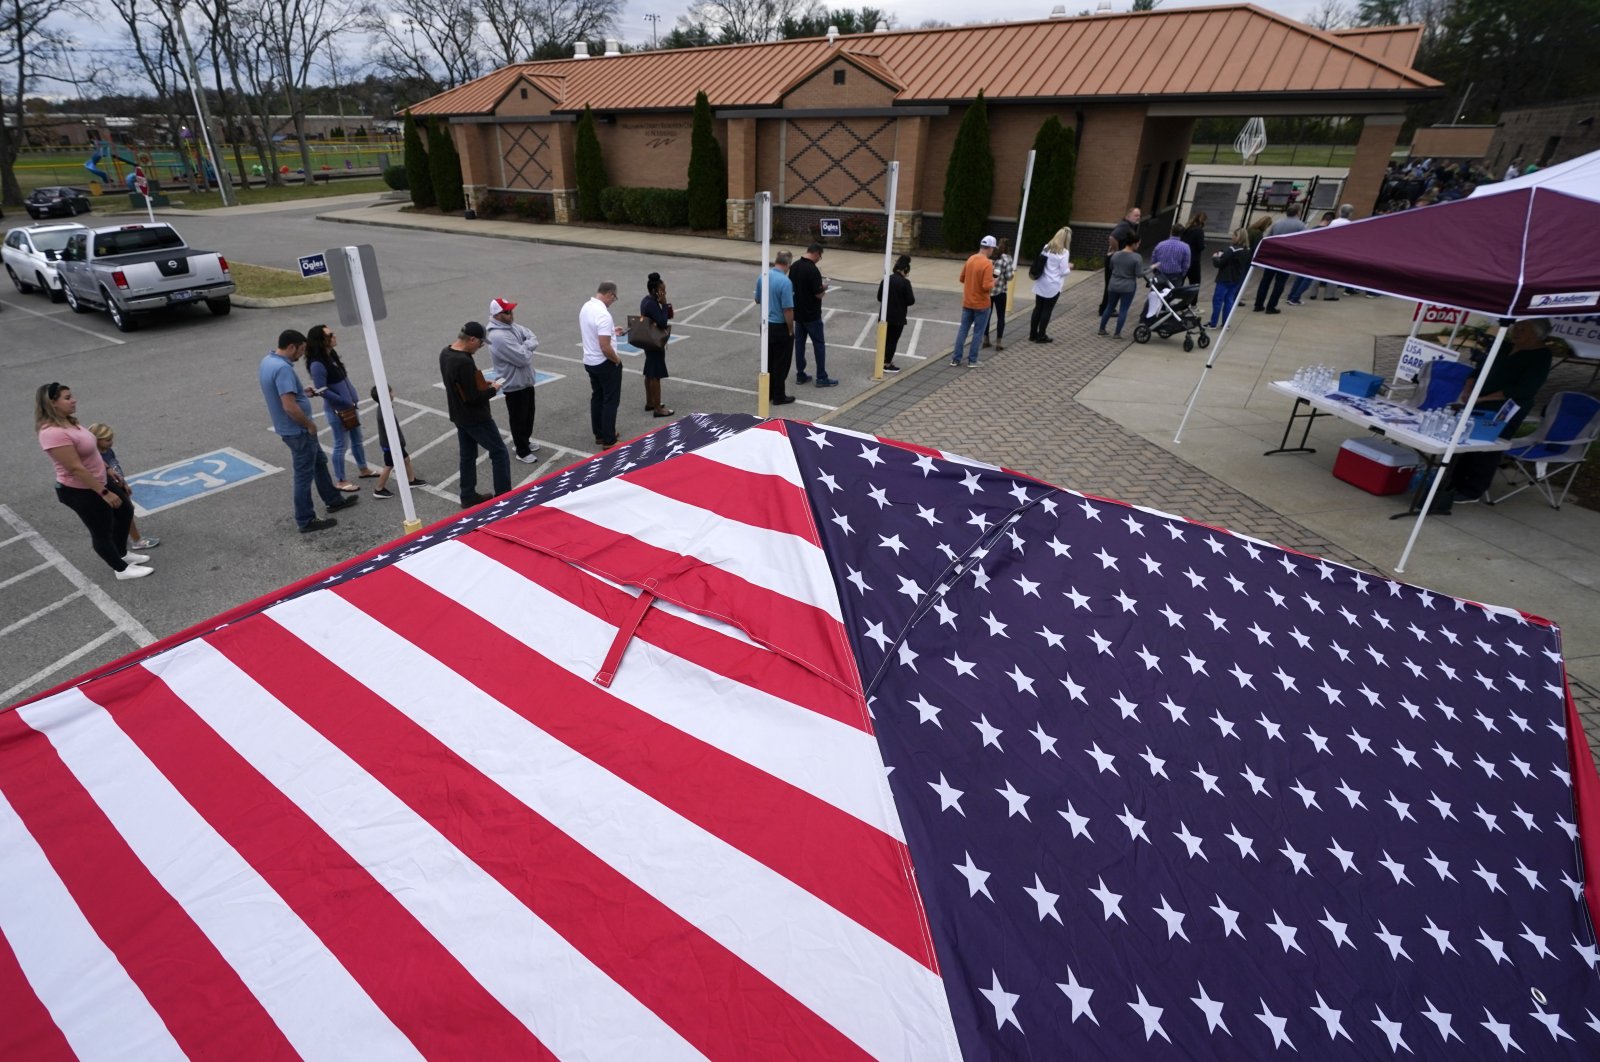 People line up to vote near tents set up by candidates&#039; supporters, Nolensville, Tennessee, U.S., Nov. 8, 2022. (AP Photo)